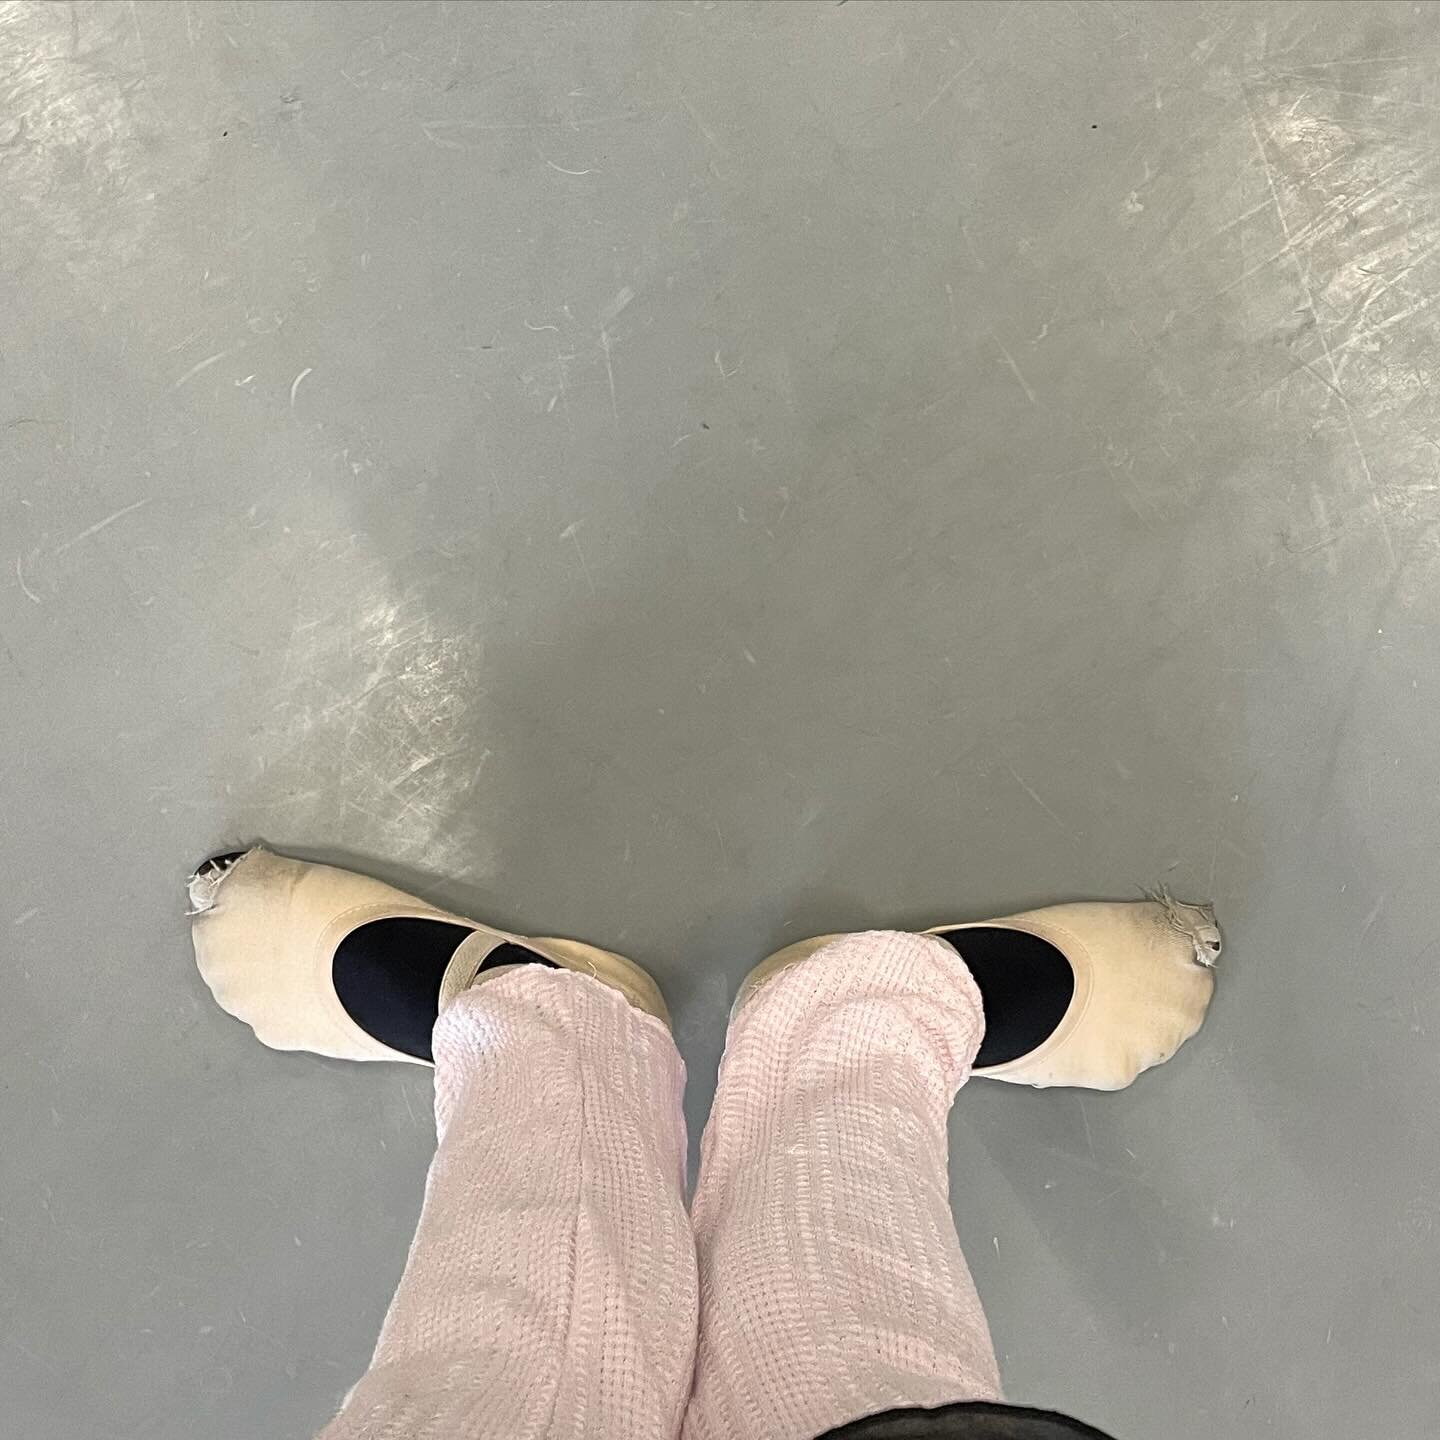 Dust off your ballet shoes or don them for the first time, because BEGINNER ADULT BALLET IS BACK!

Sign up for a six-week course or take a drop in class Mondays, 6:30-7:30 at 1920 Ethel St. Message me for link. 

Teaching this class gives me so much 